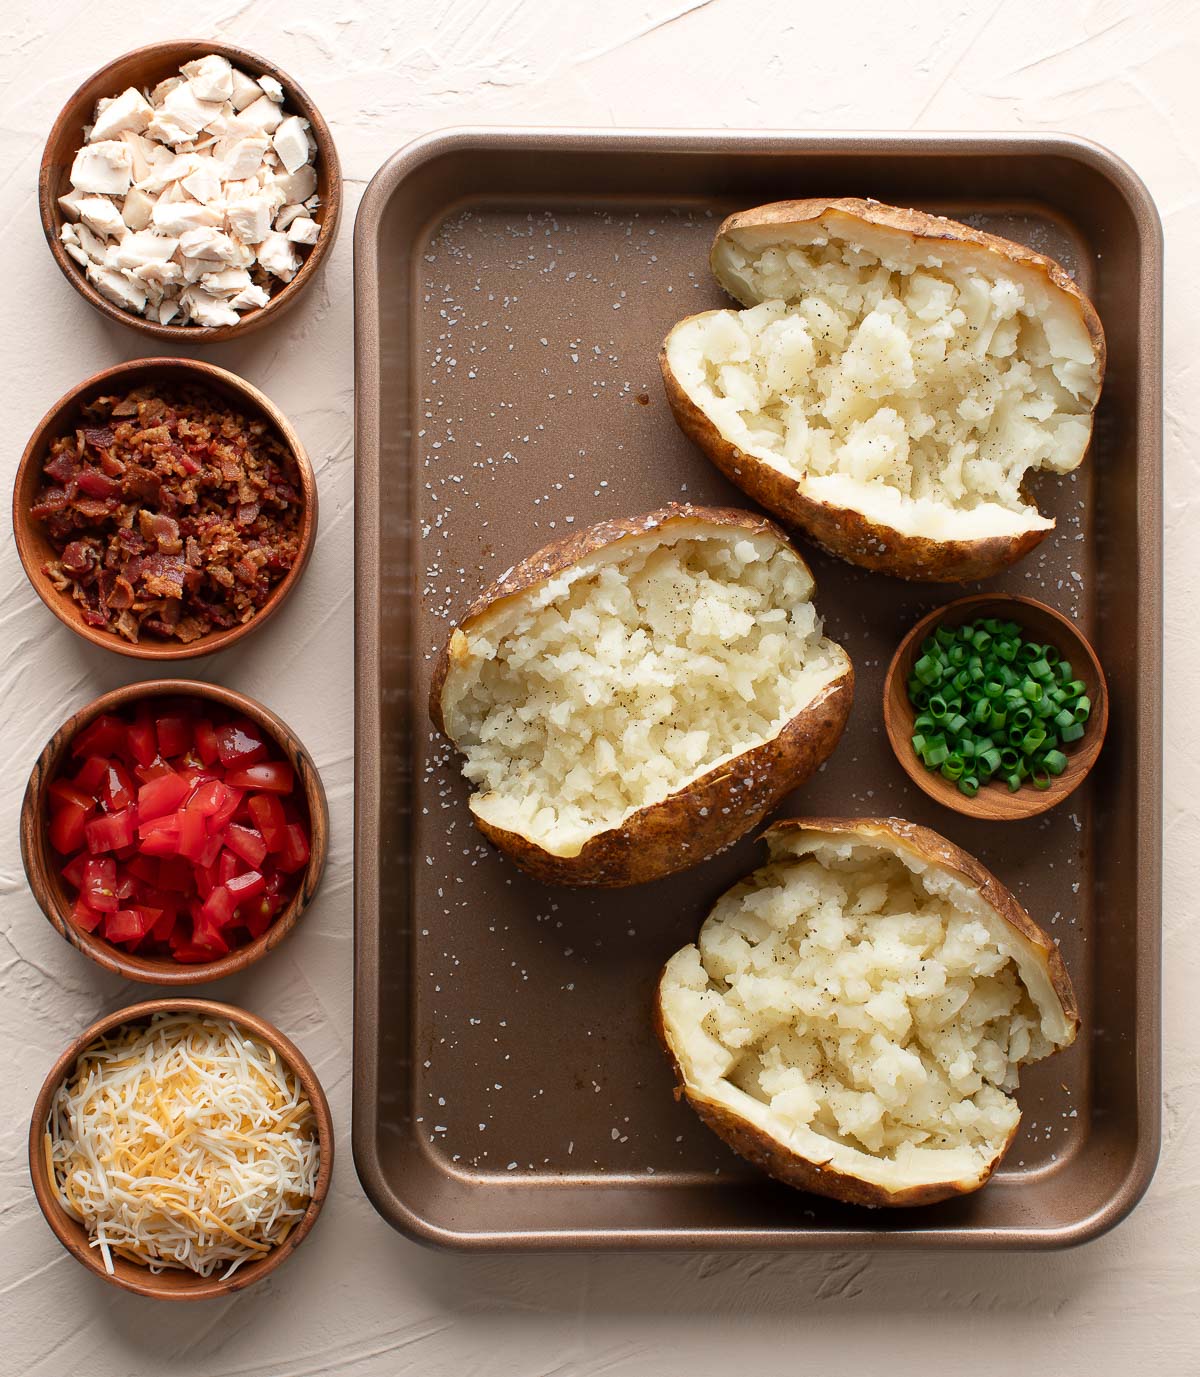 Baked Russet Potatoes with Toppings